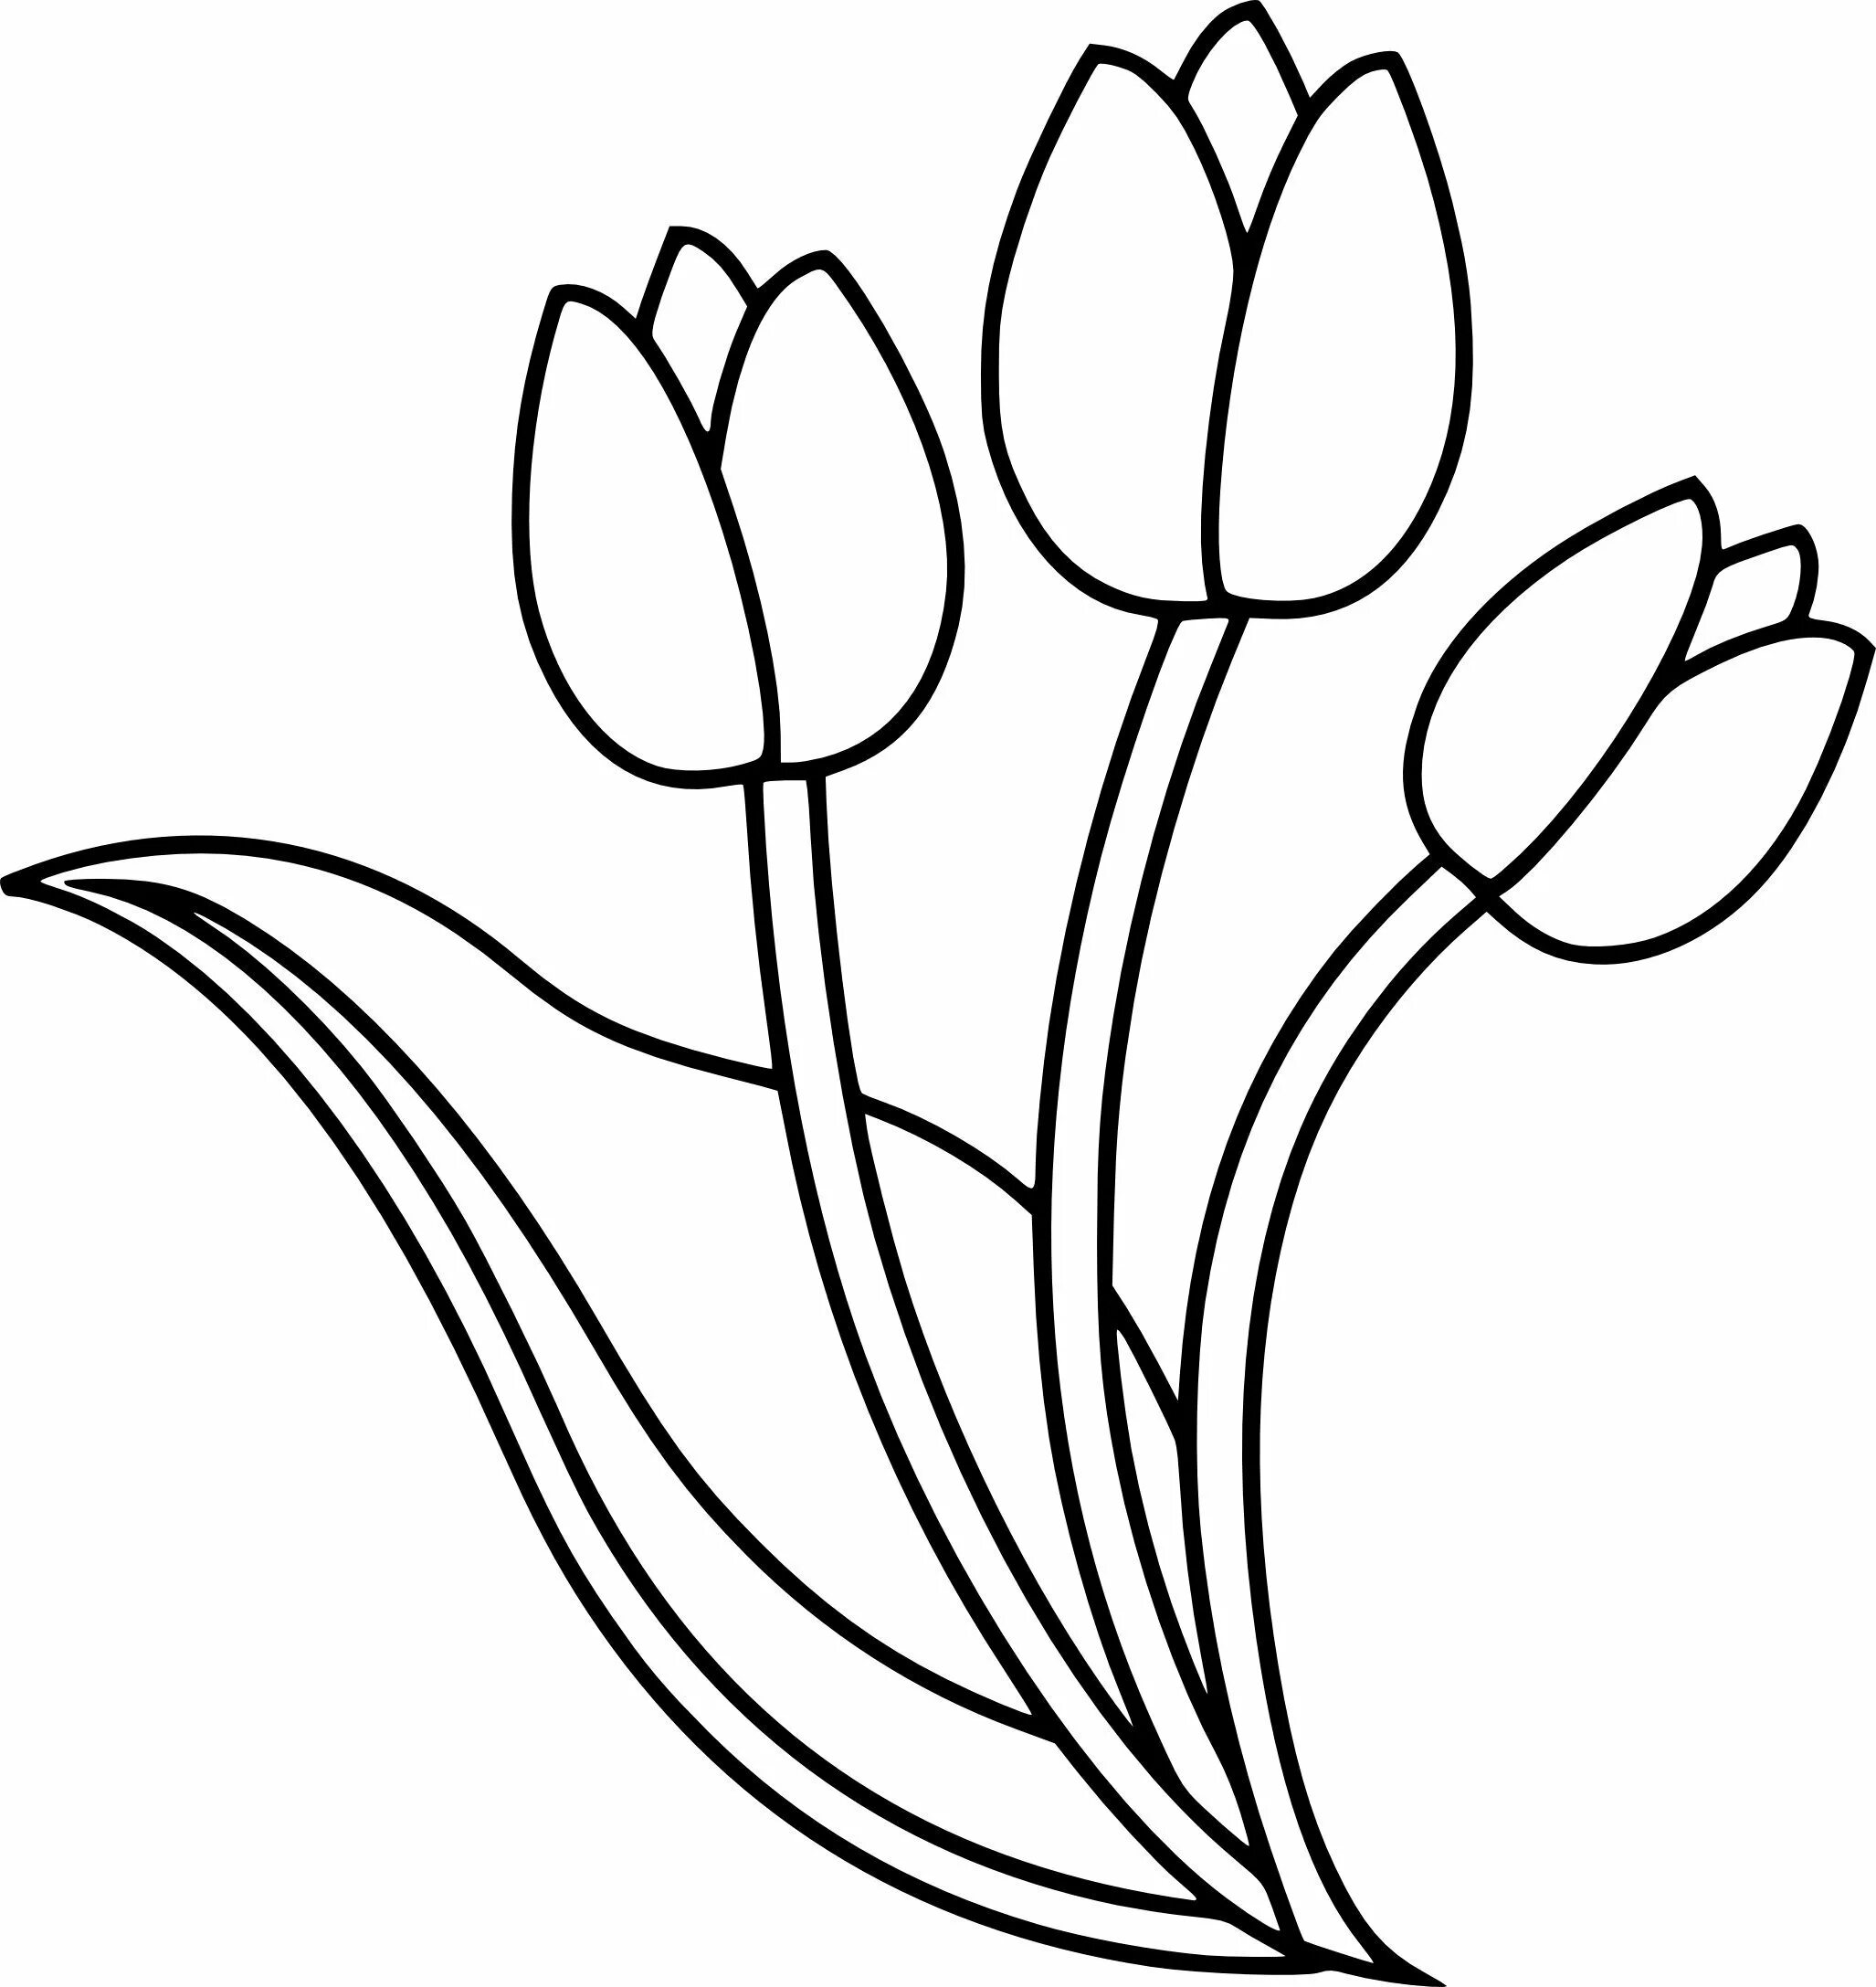 Charming tulips coloring for children 5-6 years old